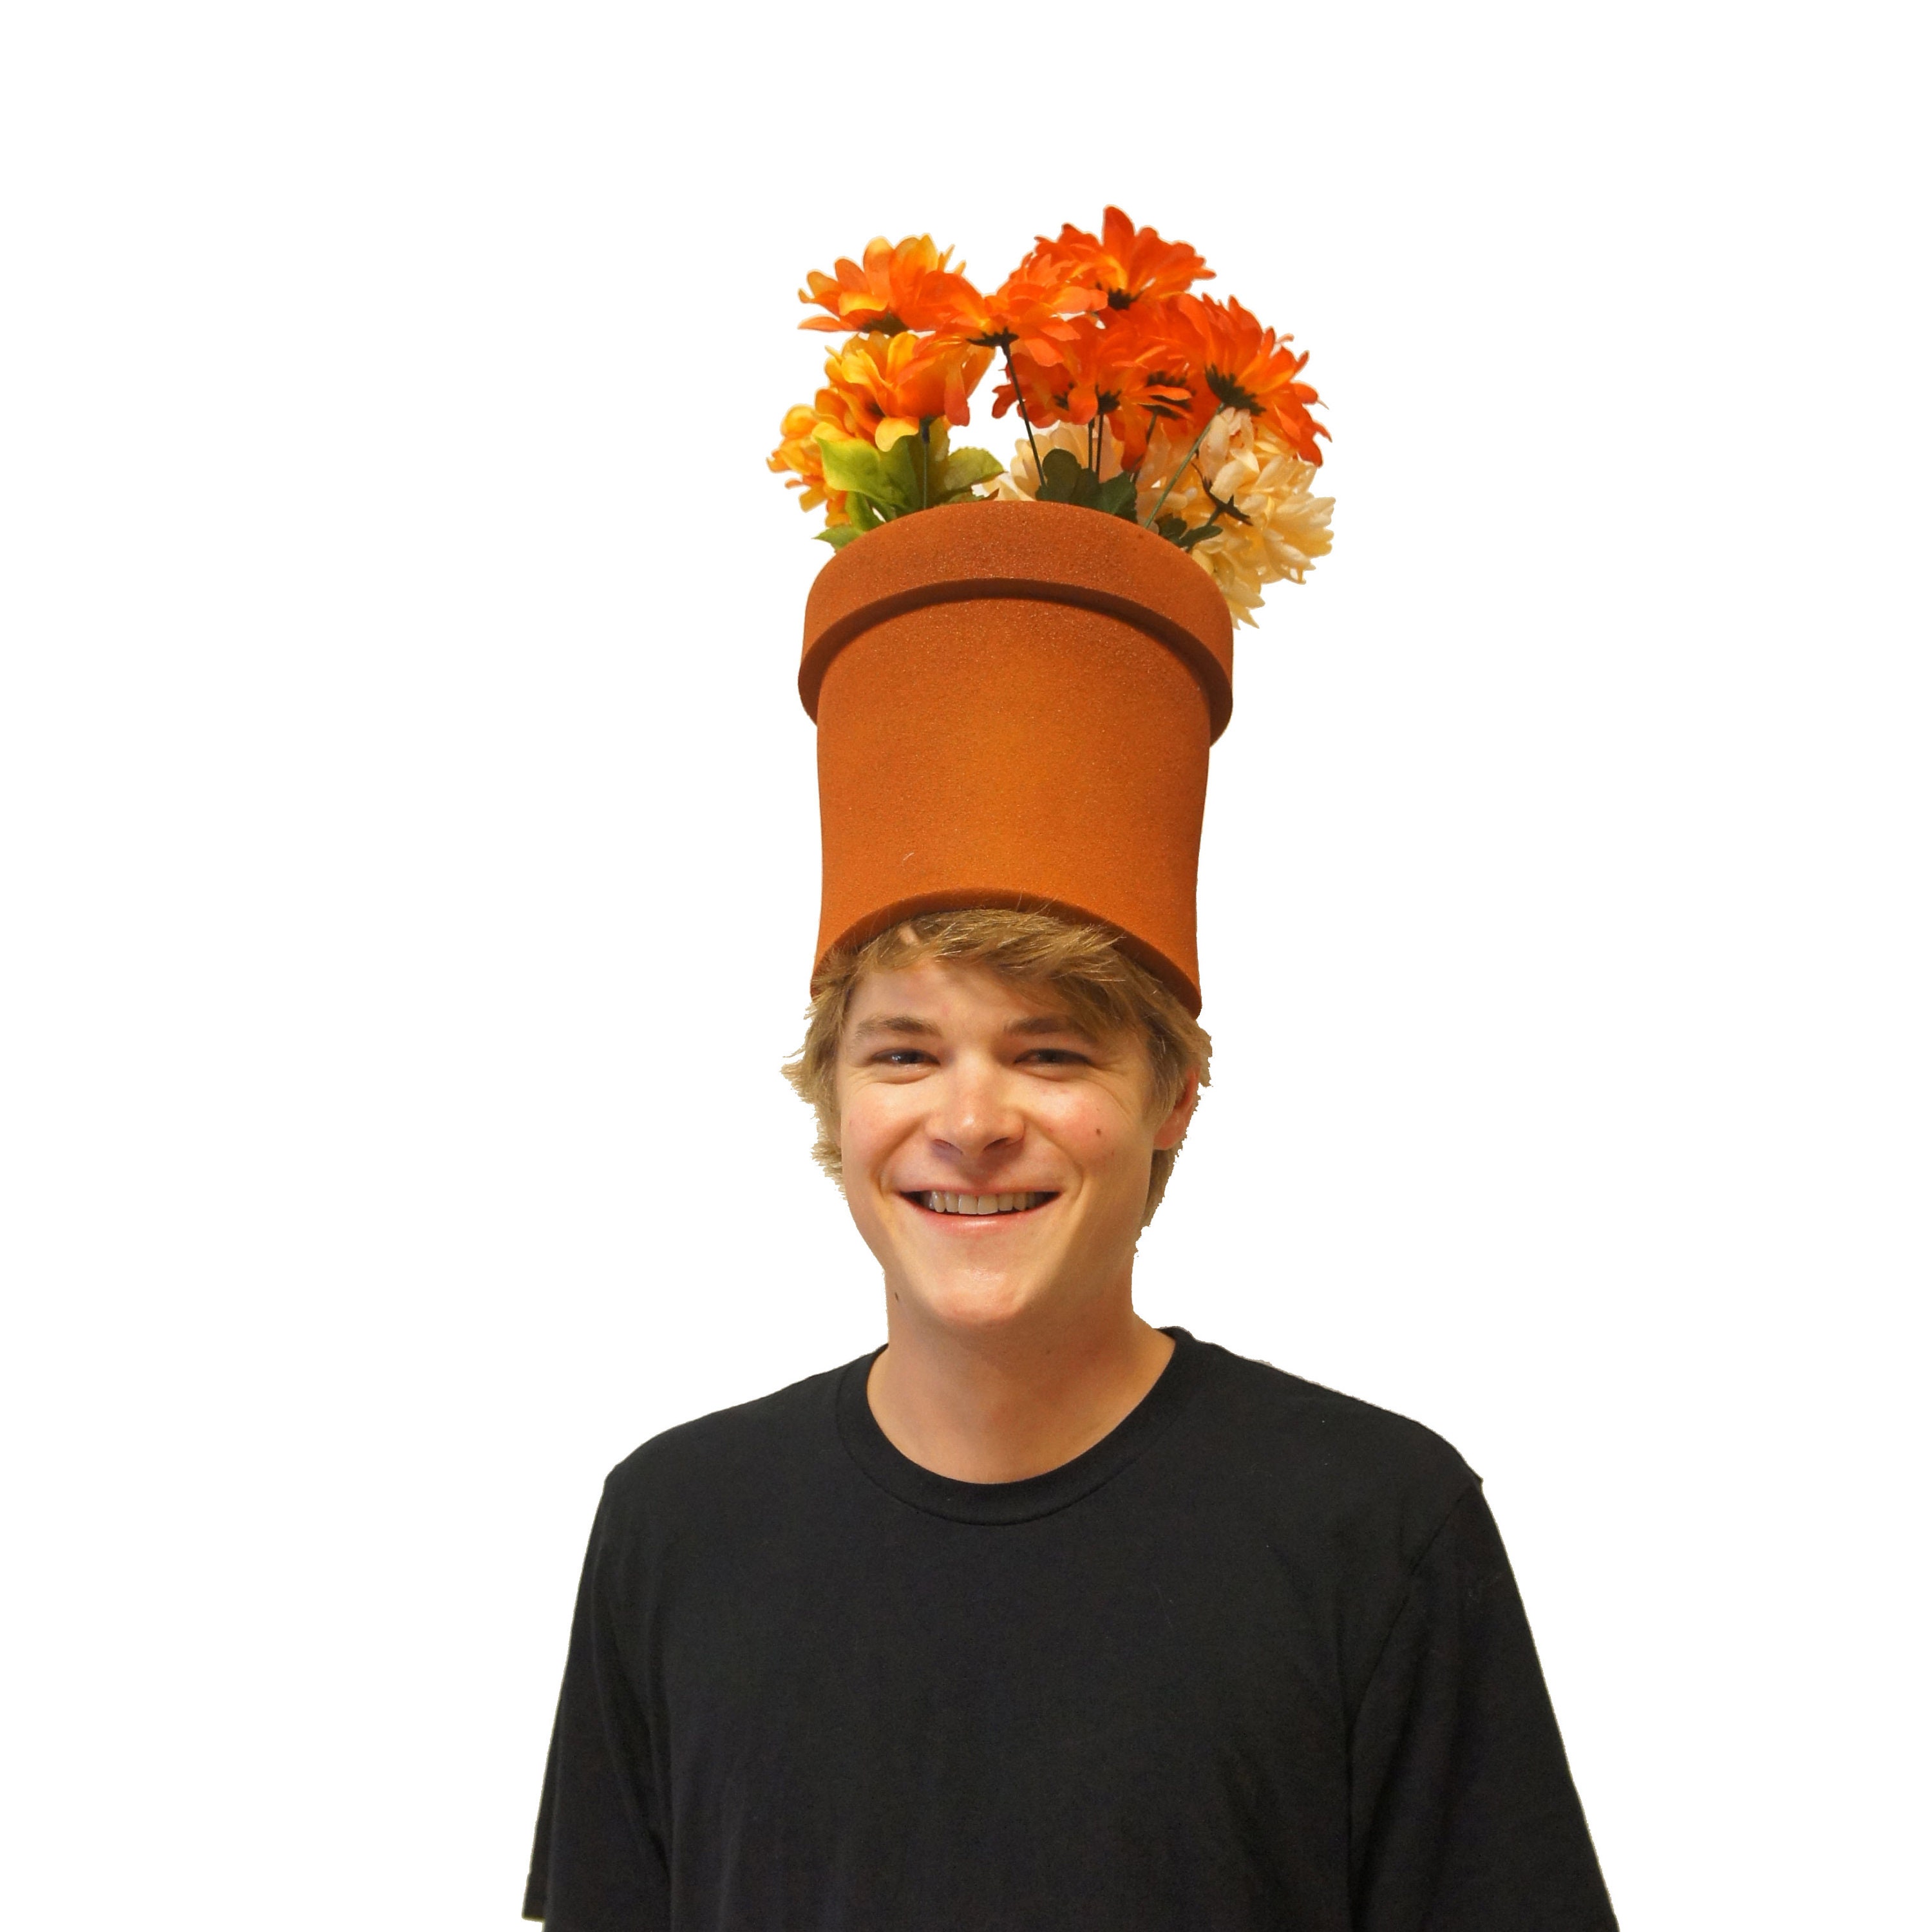 Pot Head Funny Pun Adult Halloween Costume Perfect as photo pic